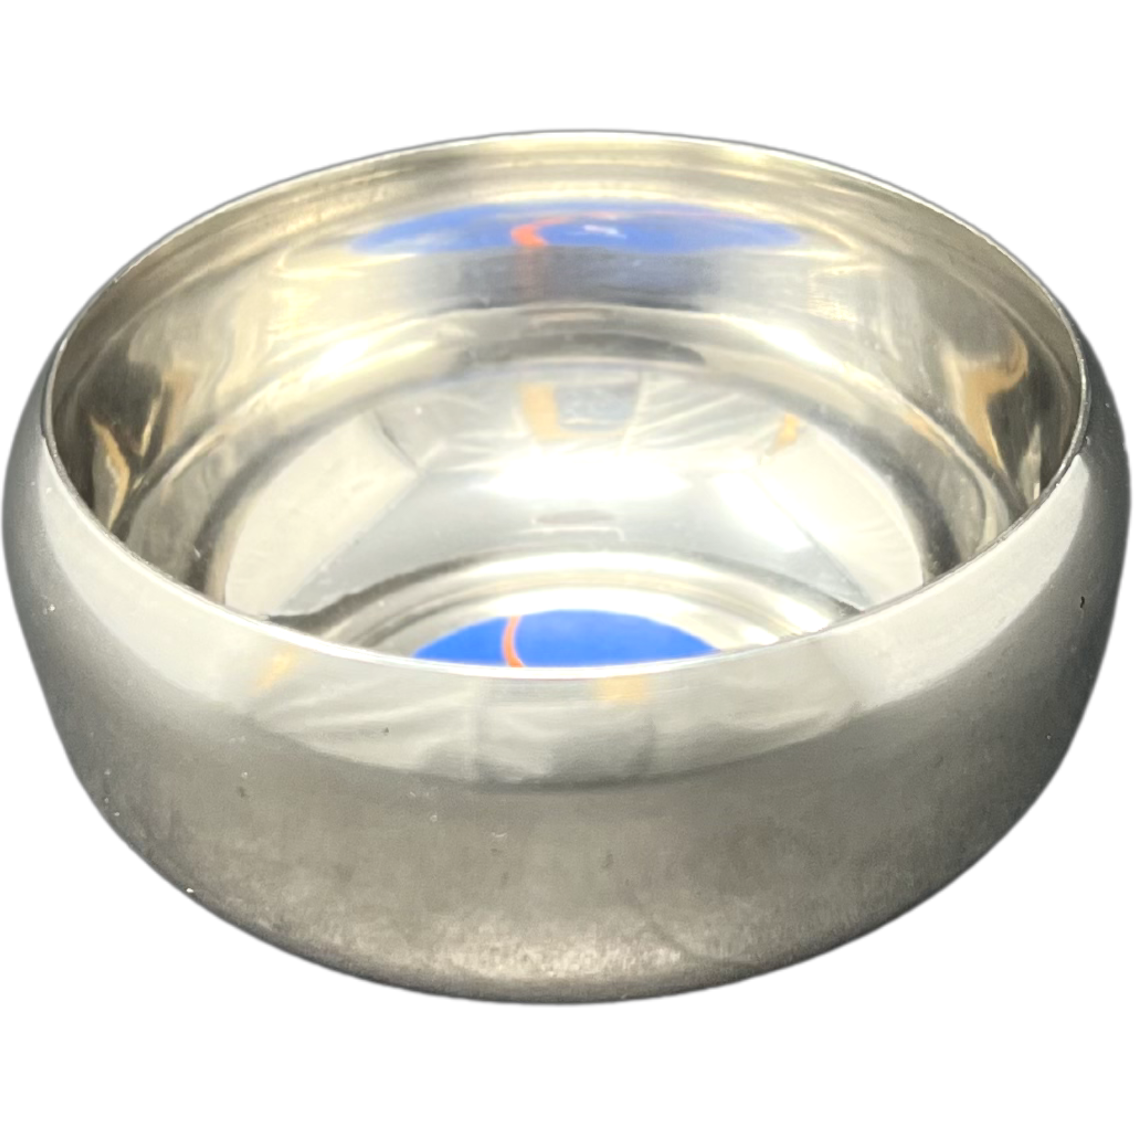 Super Shyne Stainless Steel Curved Bowl